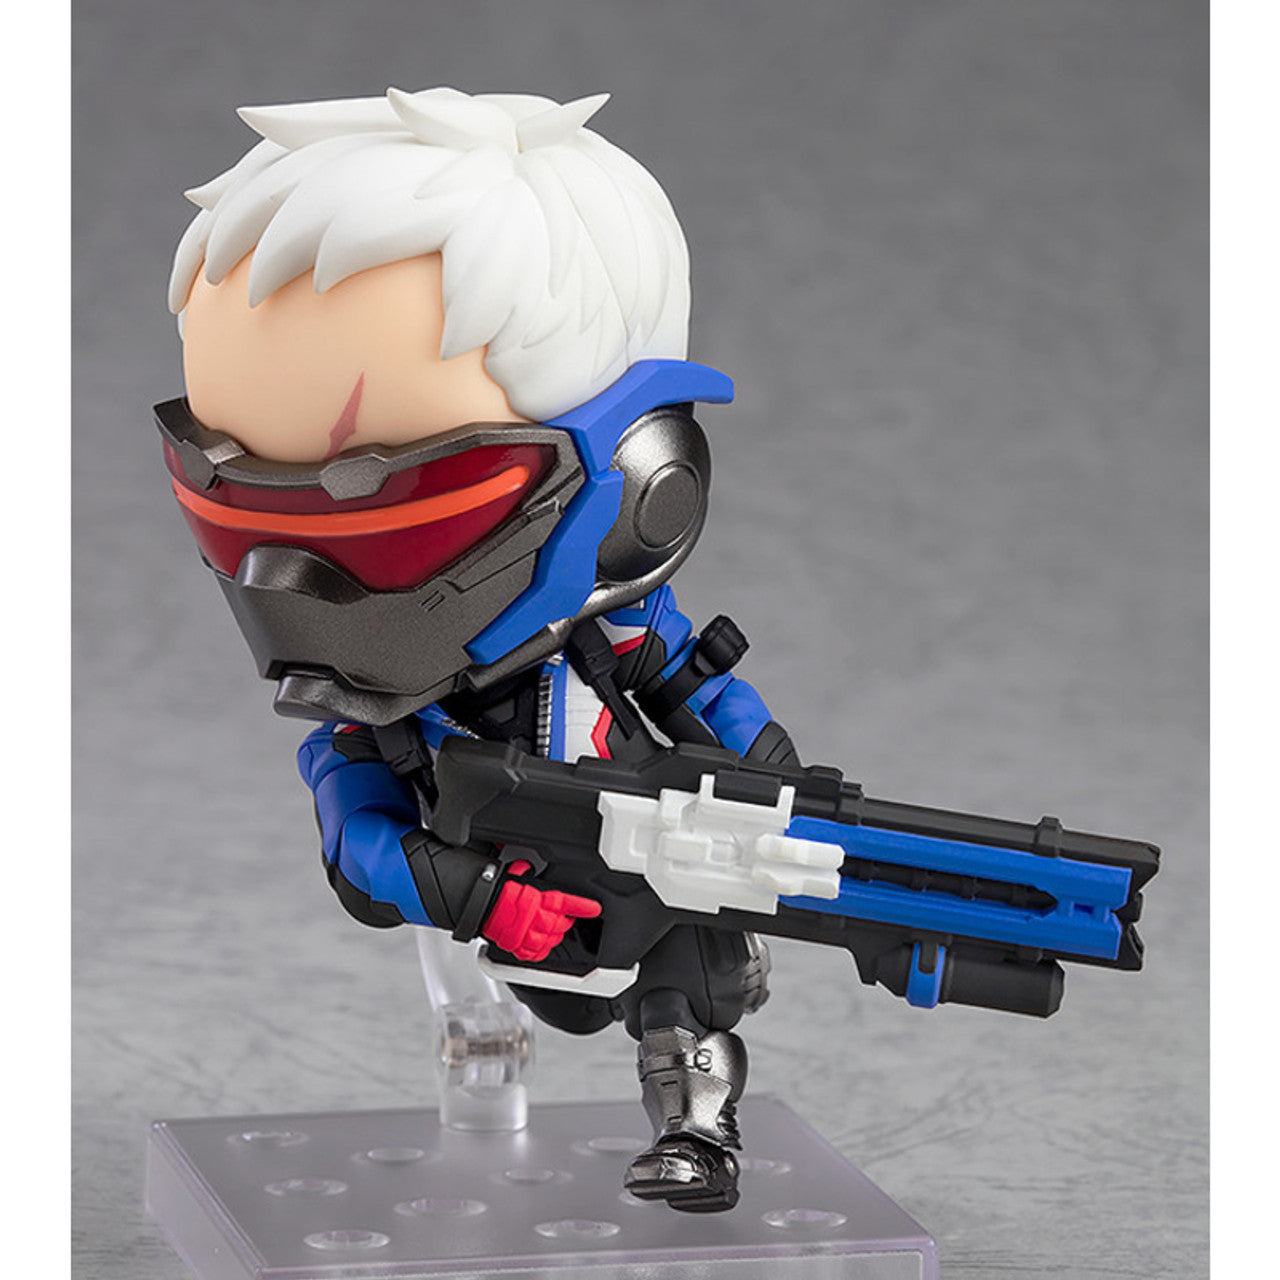 Good Smile Co. - Nendoroid: Overwatch - Soldier 76 (Classic Skin Edition)